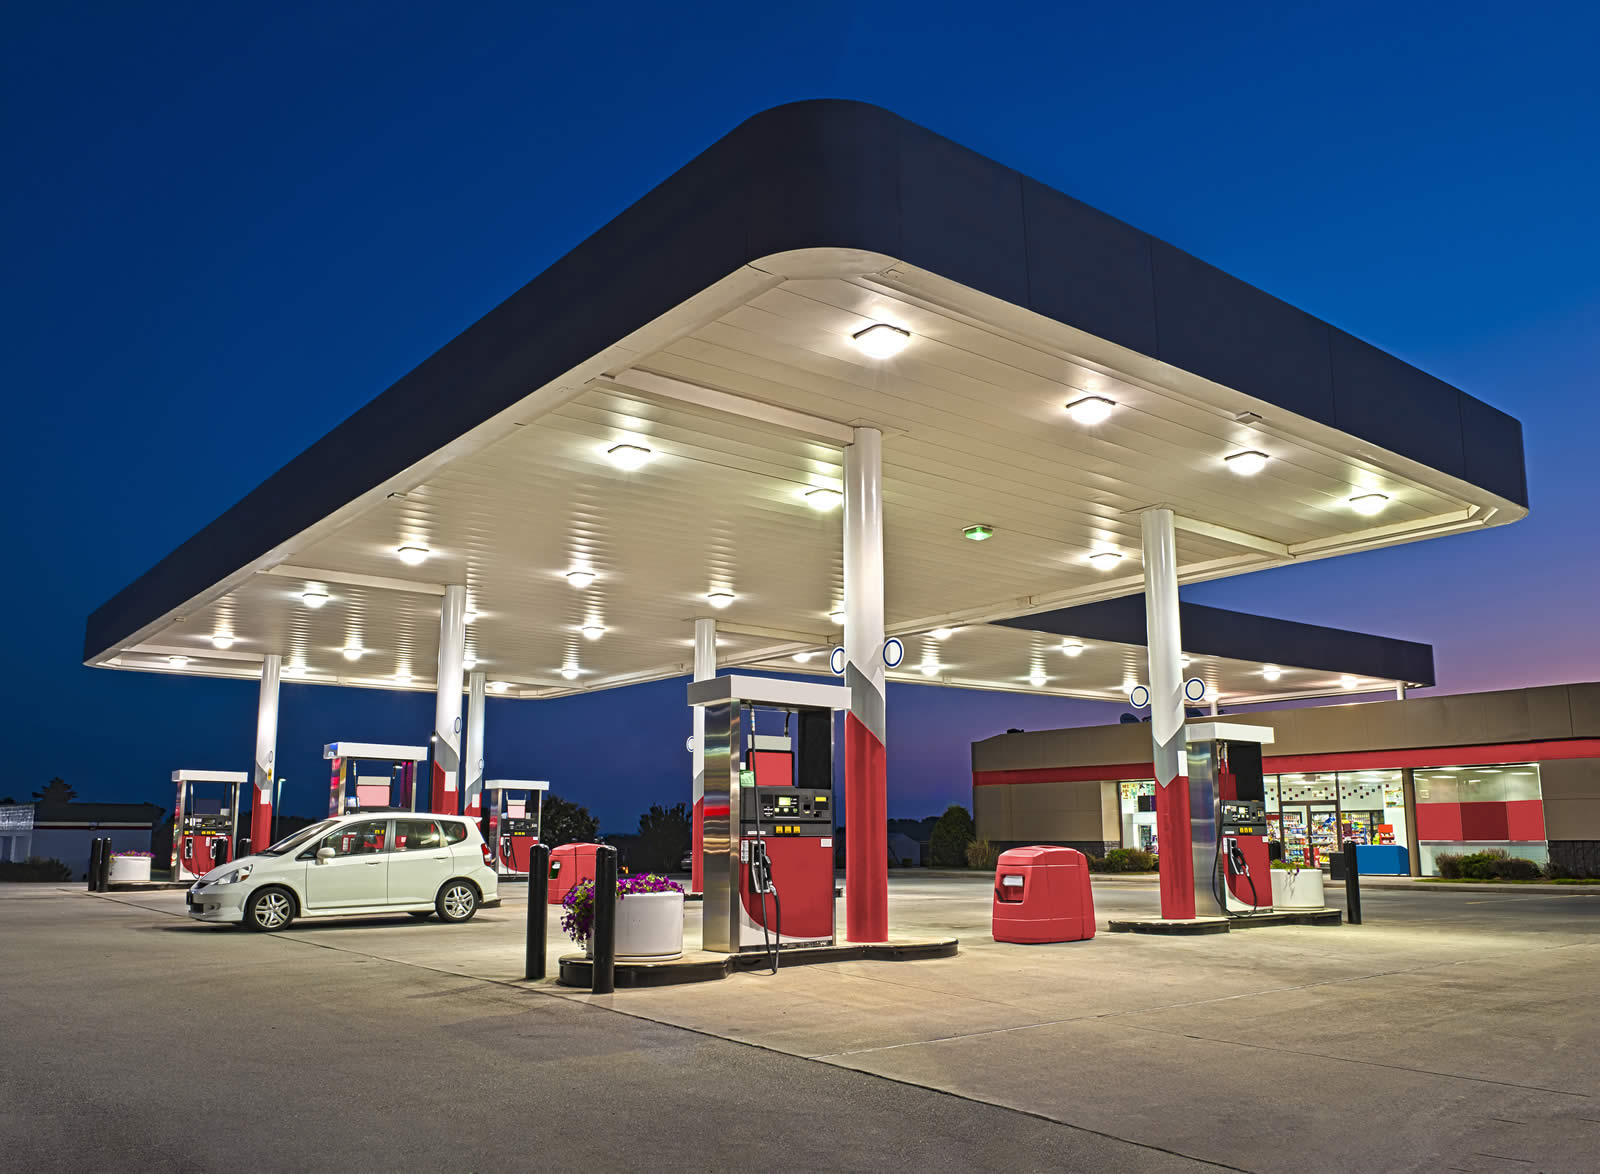 Petrol station at dusk with cars visible on forecourt and shop at the rear